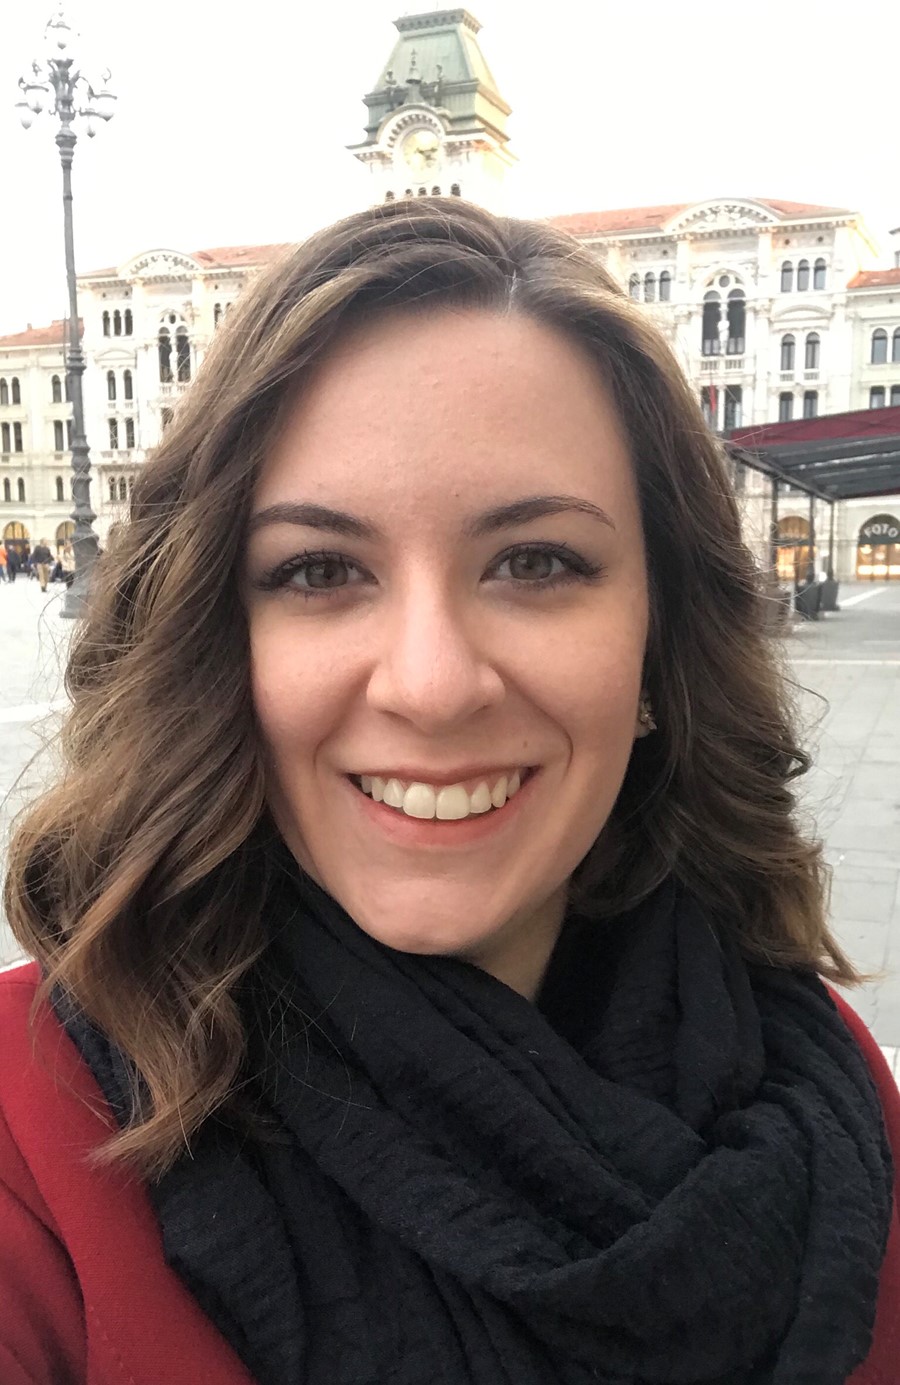 Arianna Gazzi is a Ph.D student in nanotechnology at the University of Trieste (Italy) in the framework of the Graphene Flagship Partnering Project G-IMMUNOMICS.